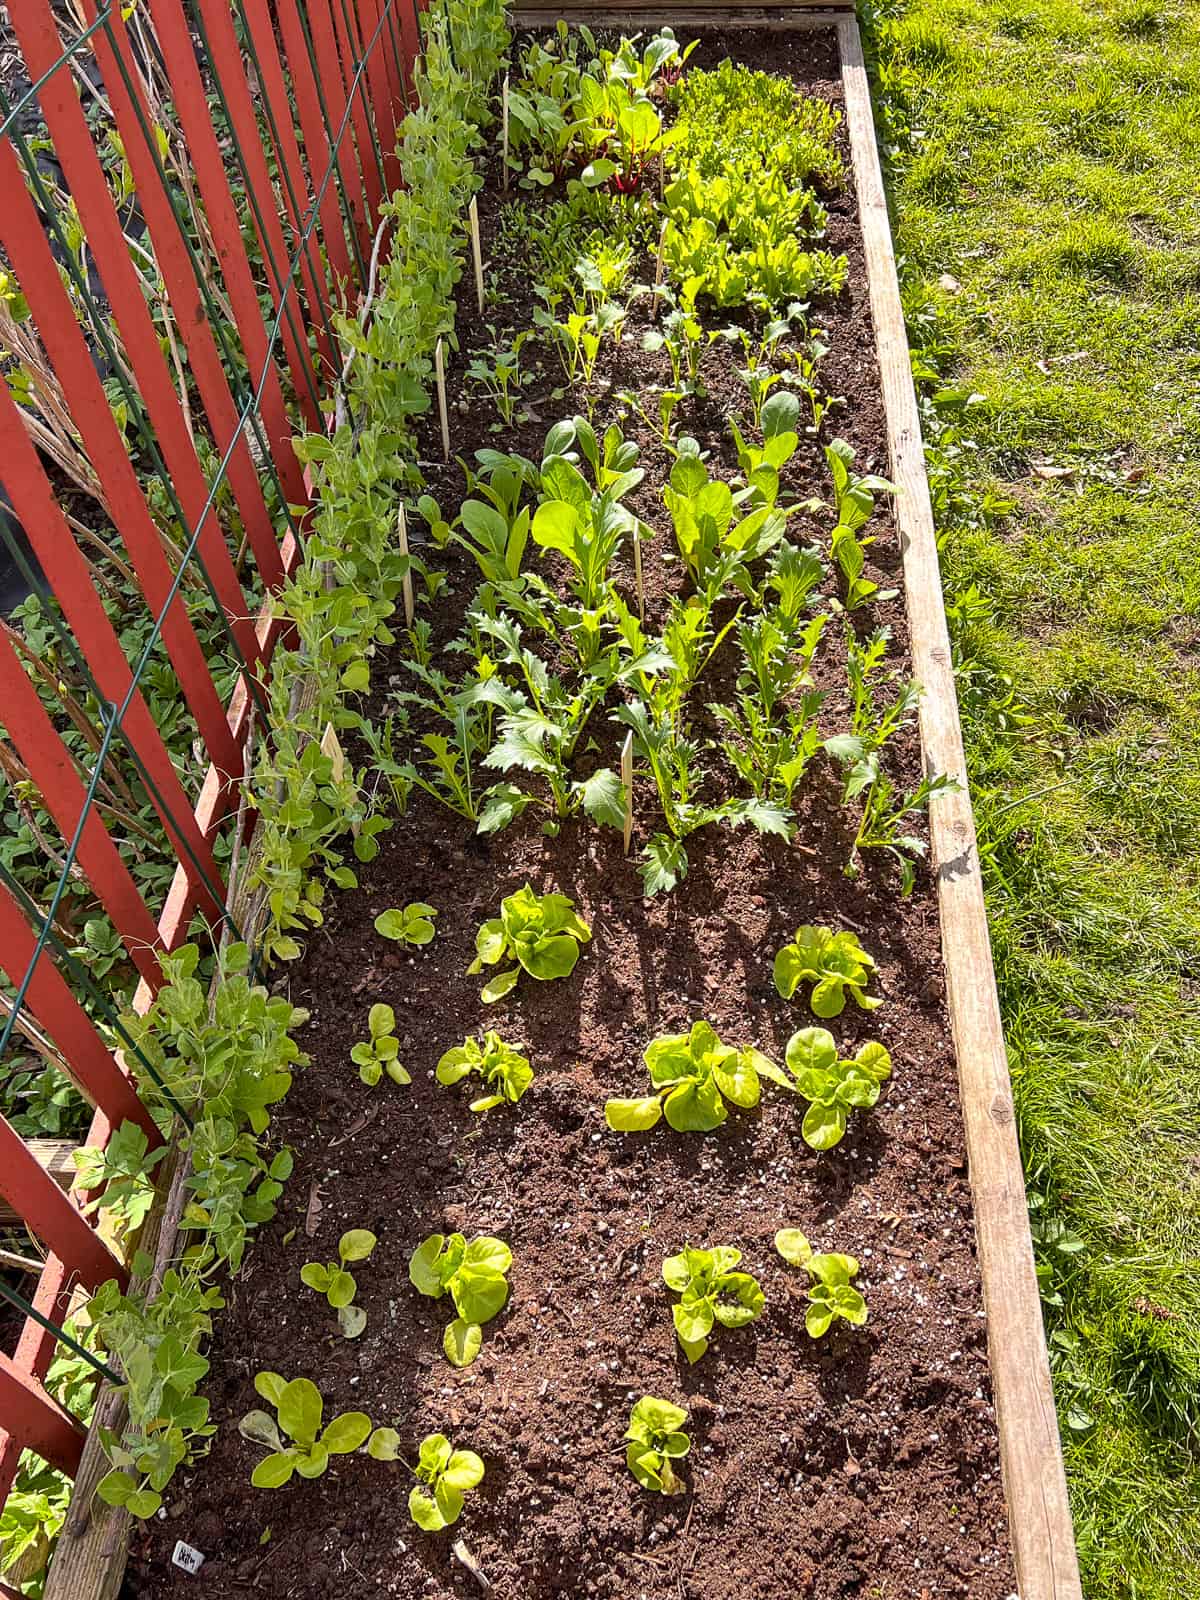 A raised bed filled with plants and with peas growing on the fence one side.